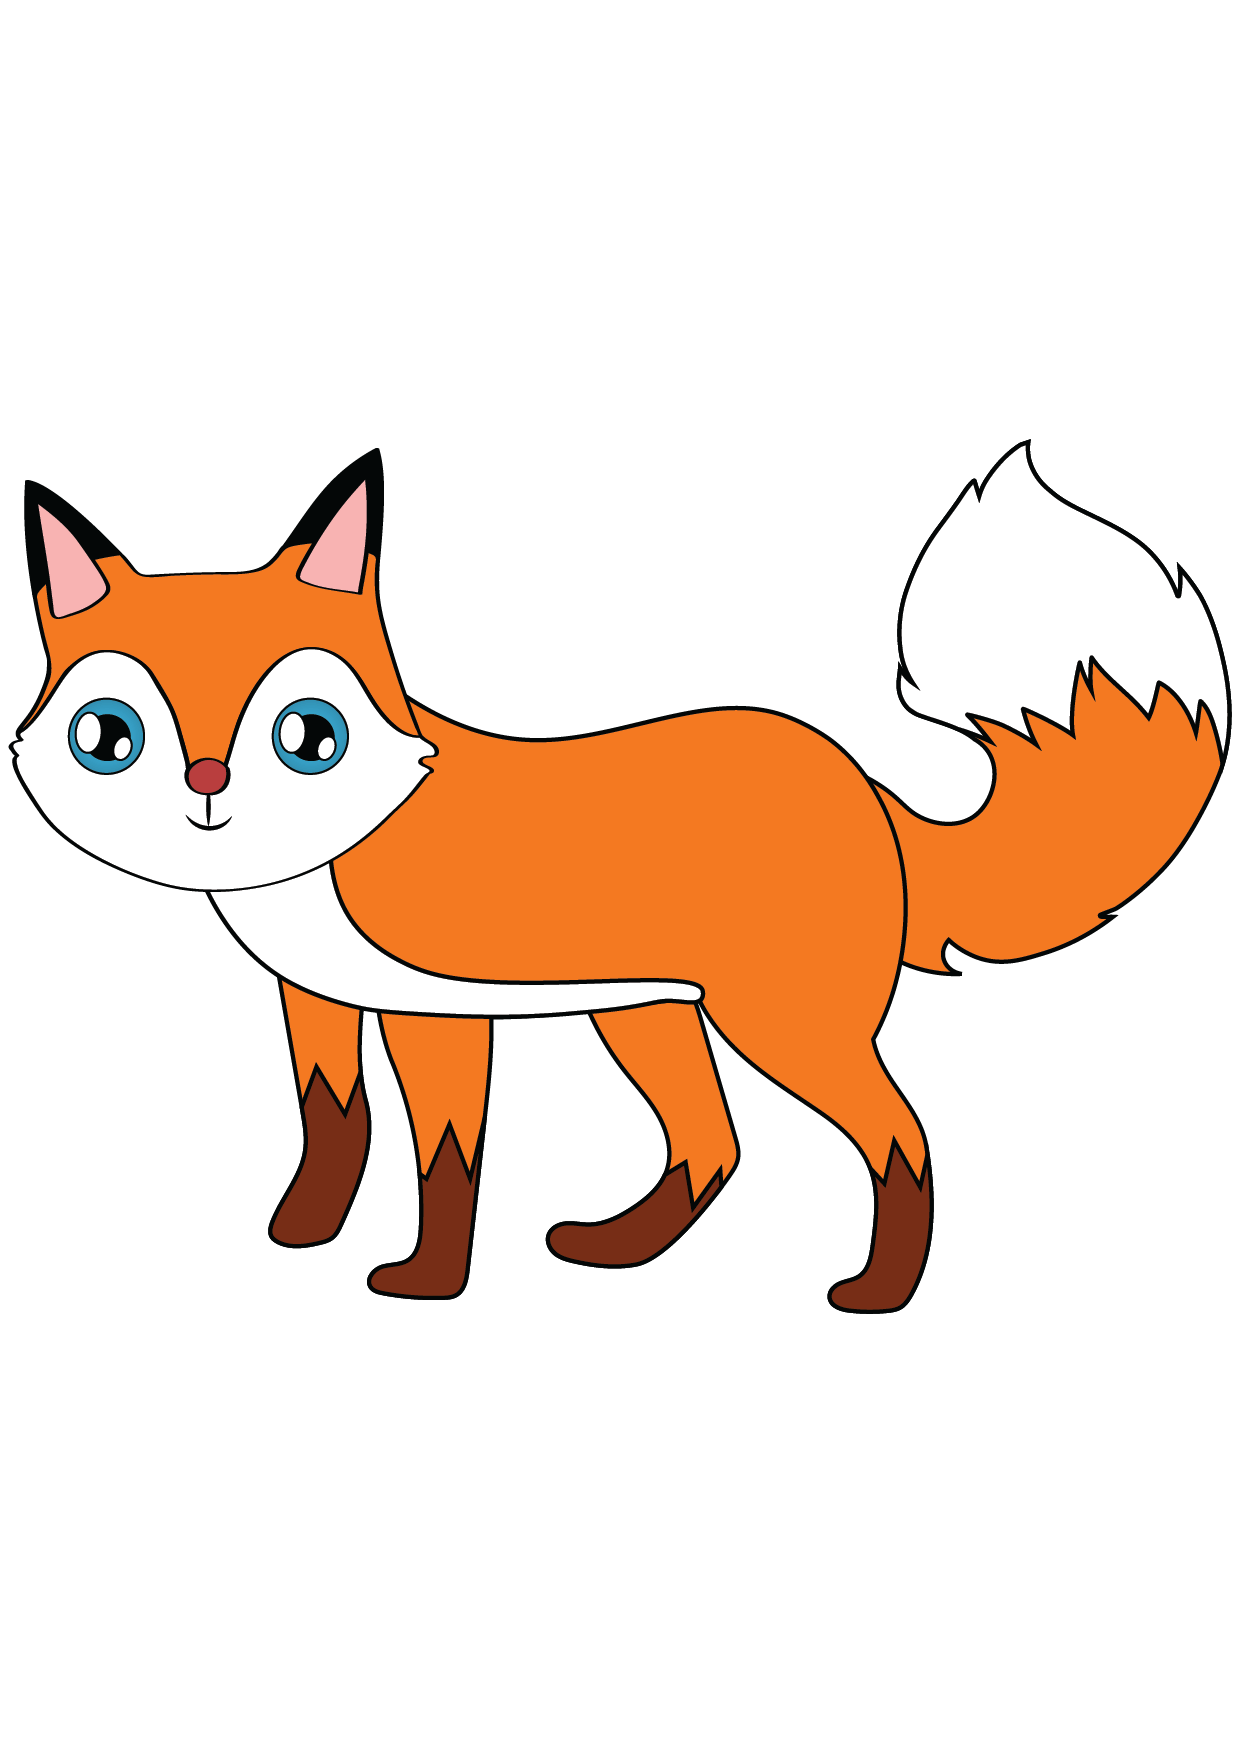 How to Draw A Fox Step by Step Printable